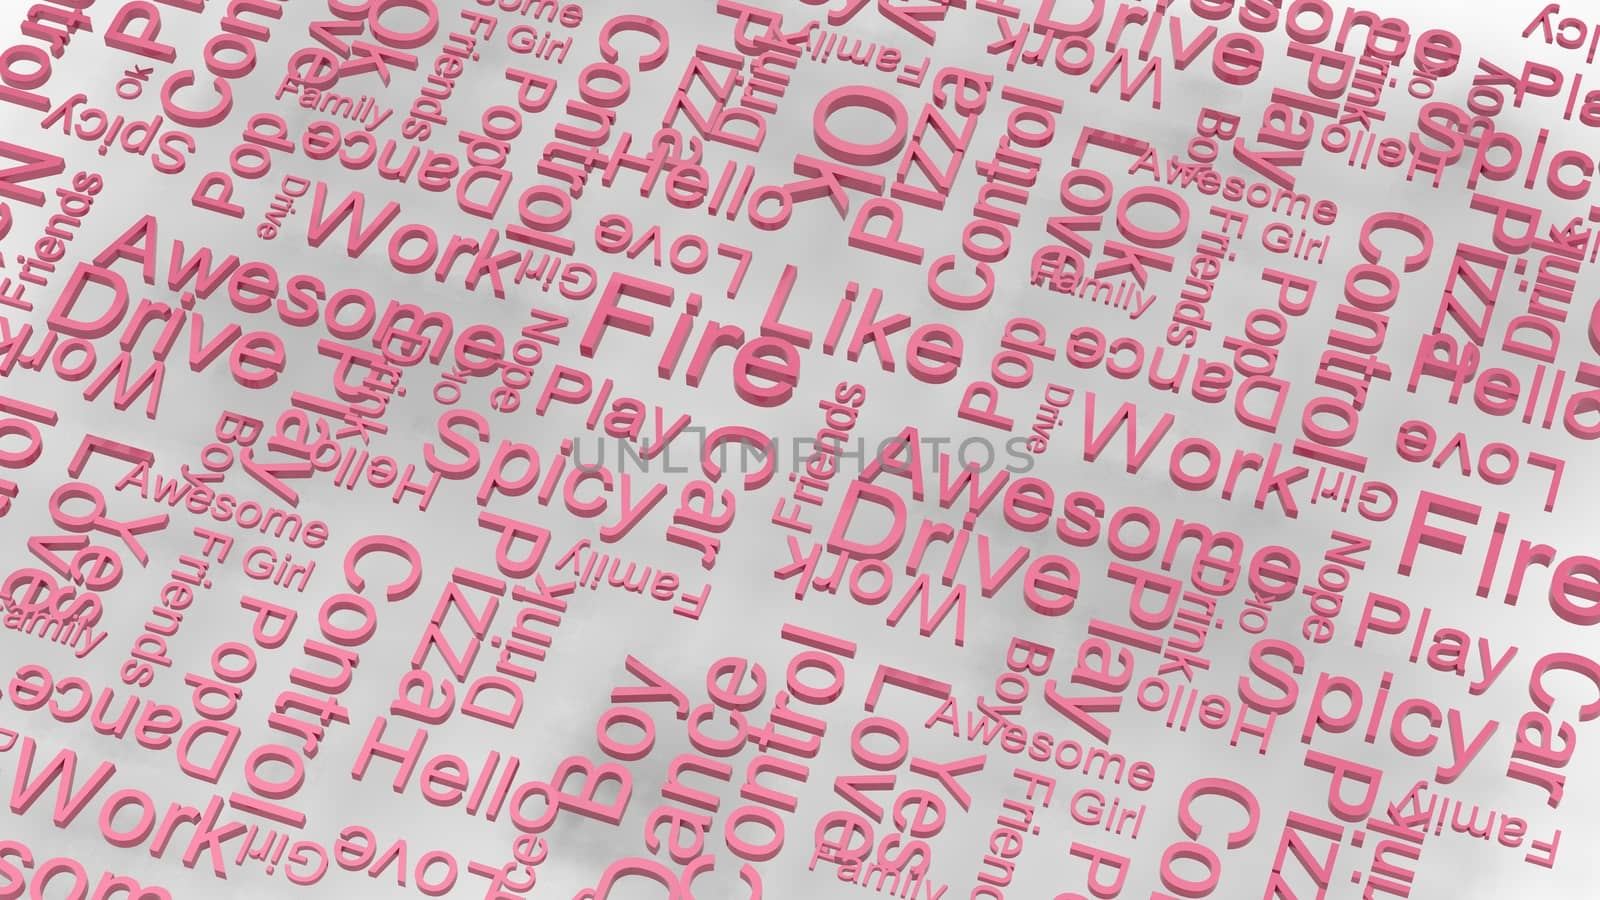 wallpaper pink text random words on a light gray background. rain of letters dictionary 3d abstract render illustration isolated. by Andreajk3